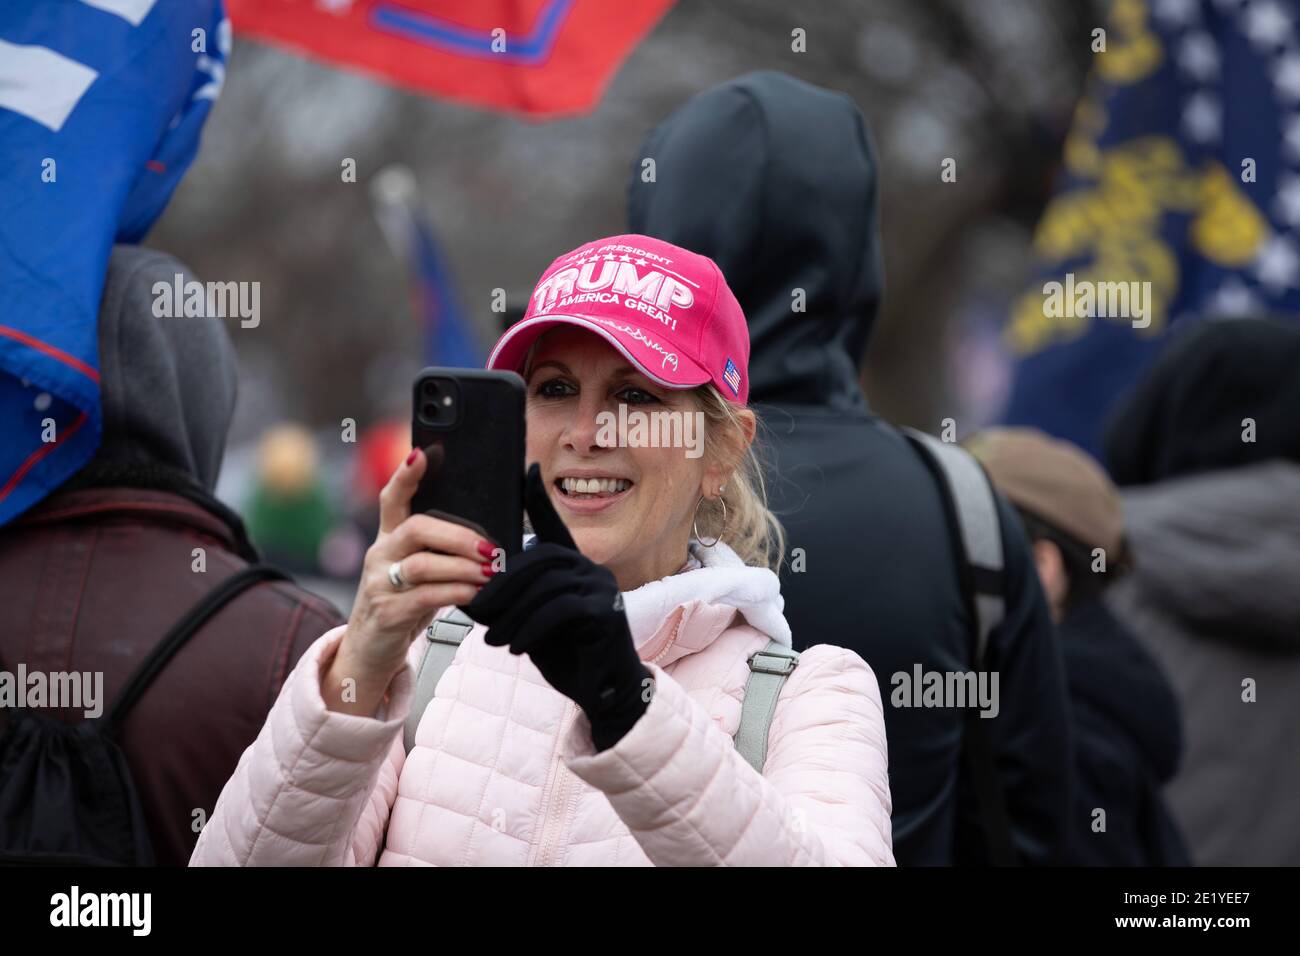 January 5, 2021: Thousands of Trump's supporters protesting at Washington Monument in support of President Donald Trump during a rally 'Save America March'', today on January 06, 2021 in Washington DC, USA. Credit: Eman Mohammed/ZUMA Wire/Alamy Live News Stock Photo